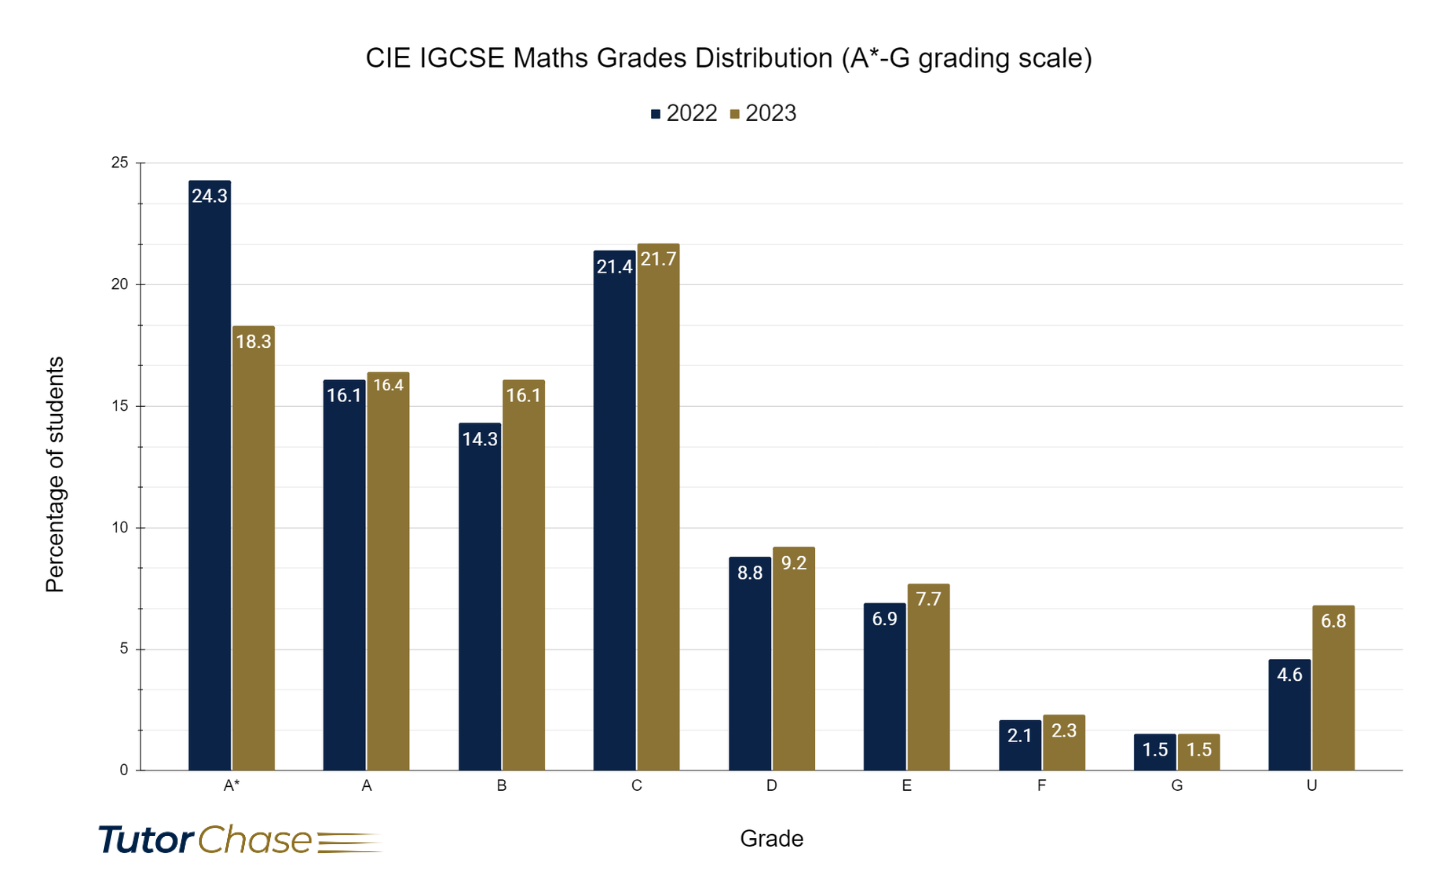 Grades distribution of CIE IGCSE Maths in UK for 2022 and 2023